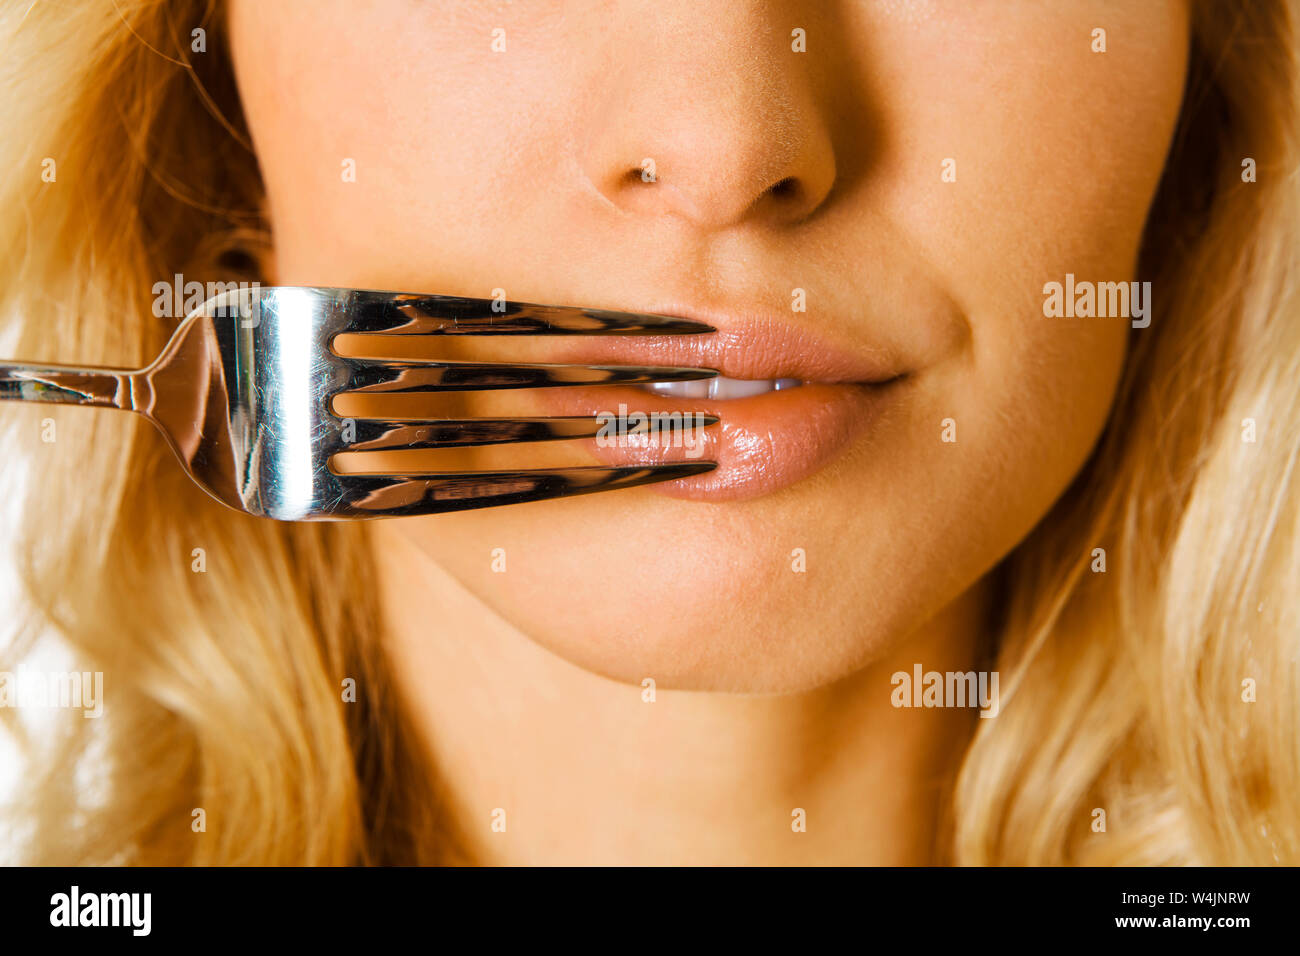 Close view on woman pressing fork to her lips. Gourmand of nutrition concept. Stock Photo